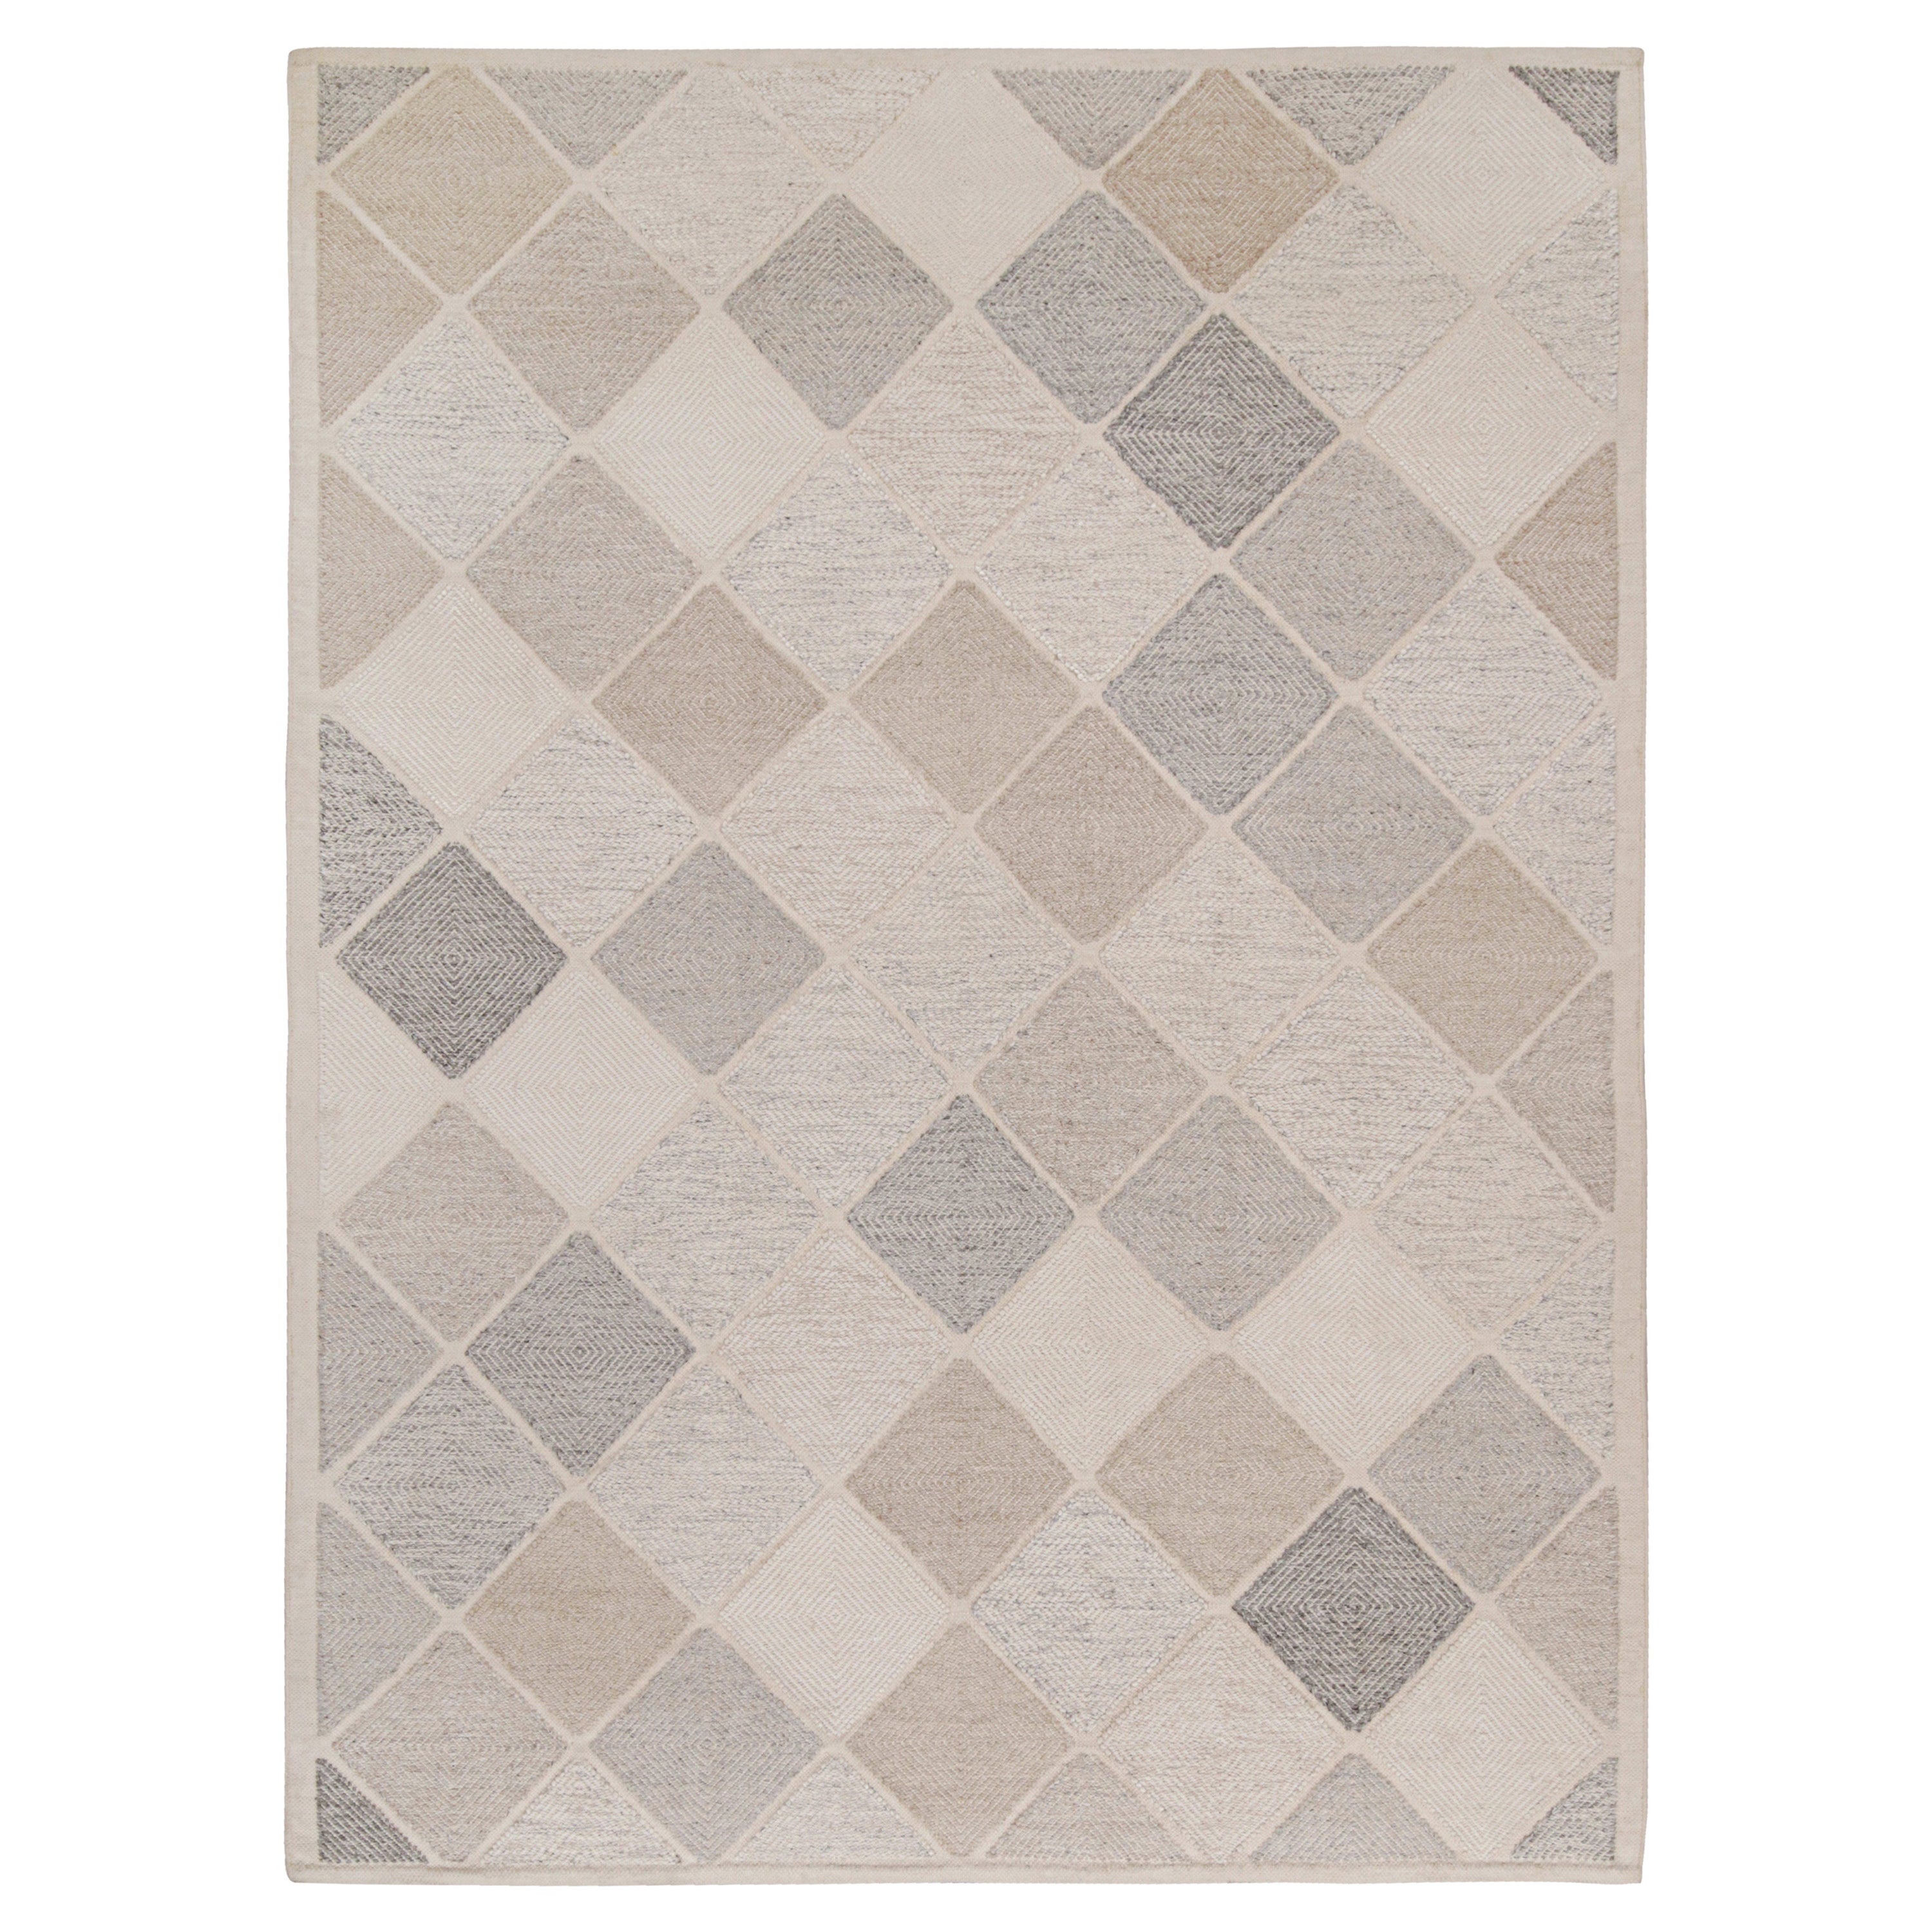 Rug & Kilim’s Scandinavian Style Kilim in White, Taupe & Gray Diamond Patterns For Sale